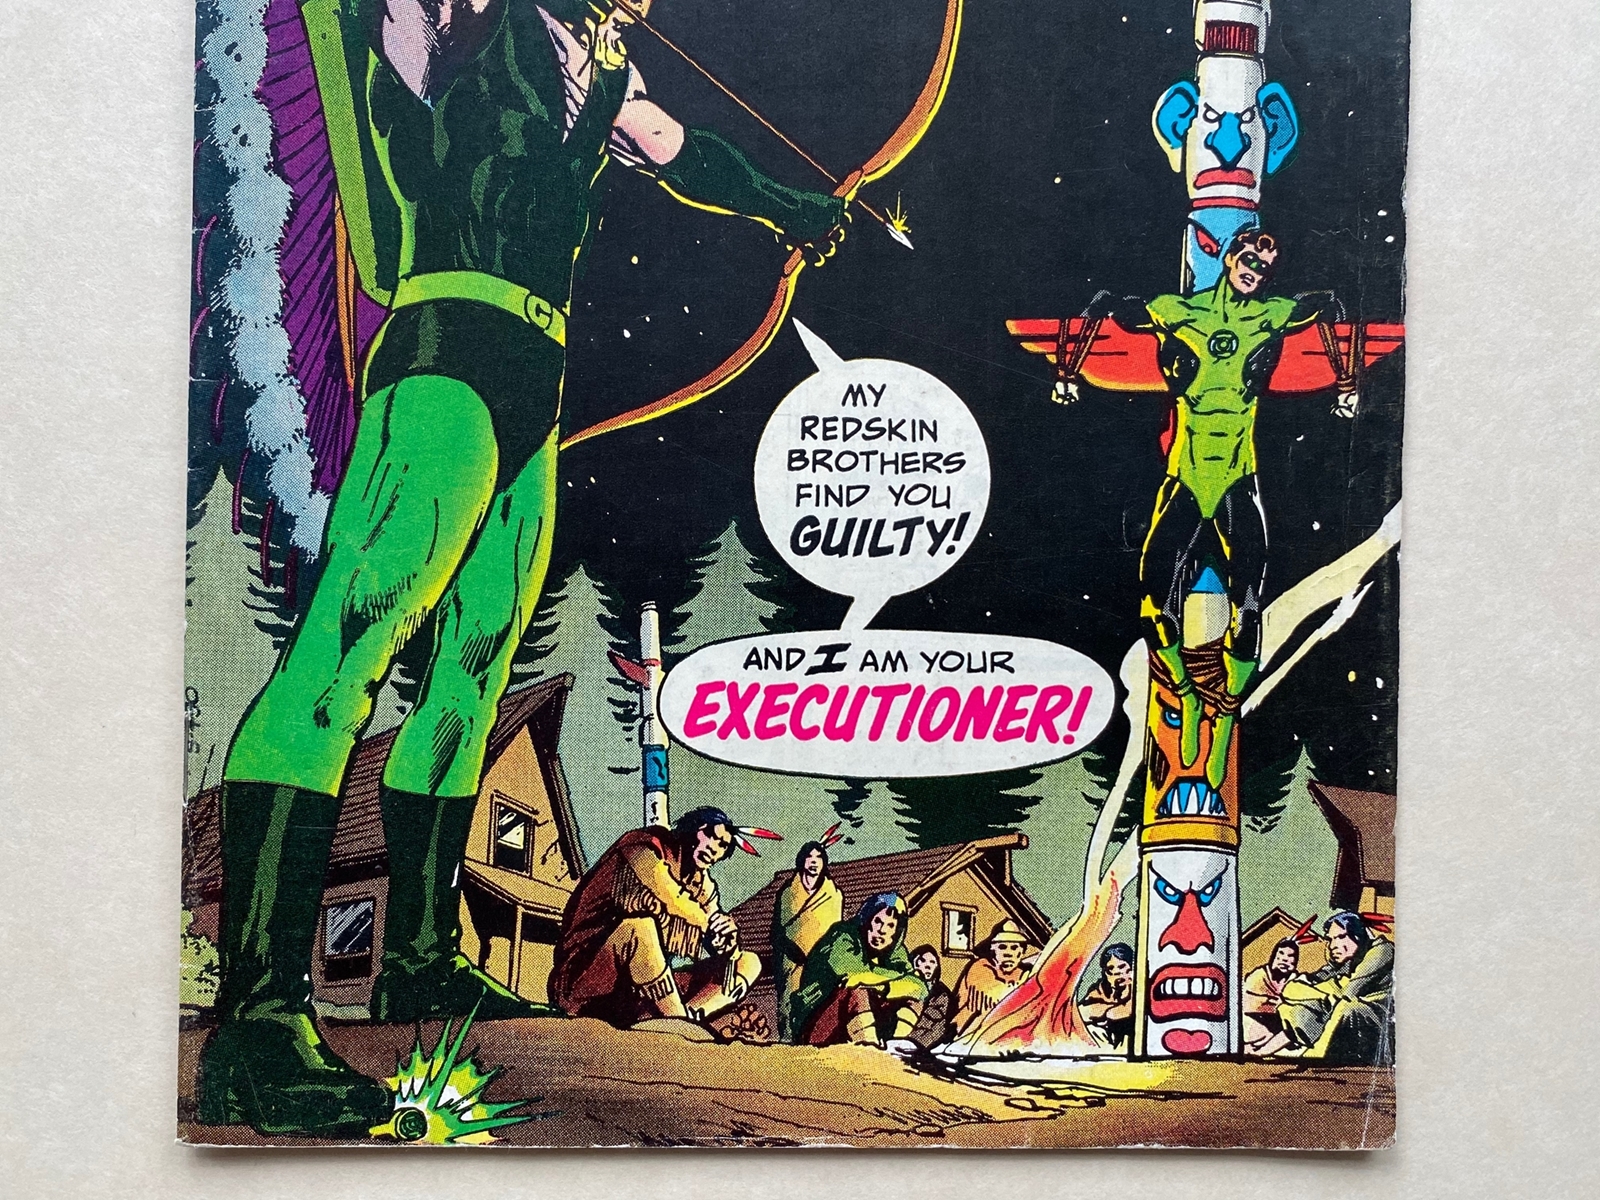 GREEN LANTERN #79 (1970 - DC) VFN (Cents Copy/Pence Stamp) - Black Canary appearance - Neal Adams - Image 3 of 10